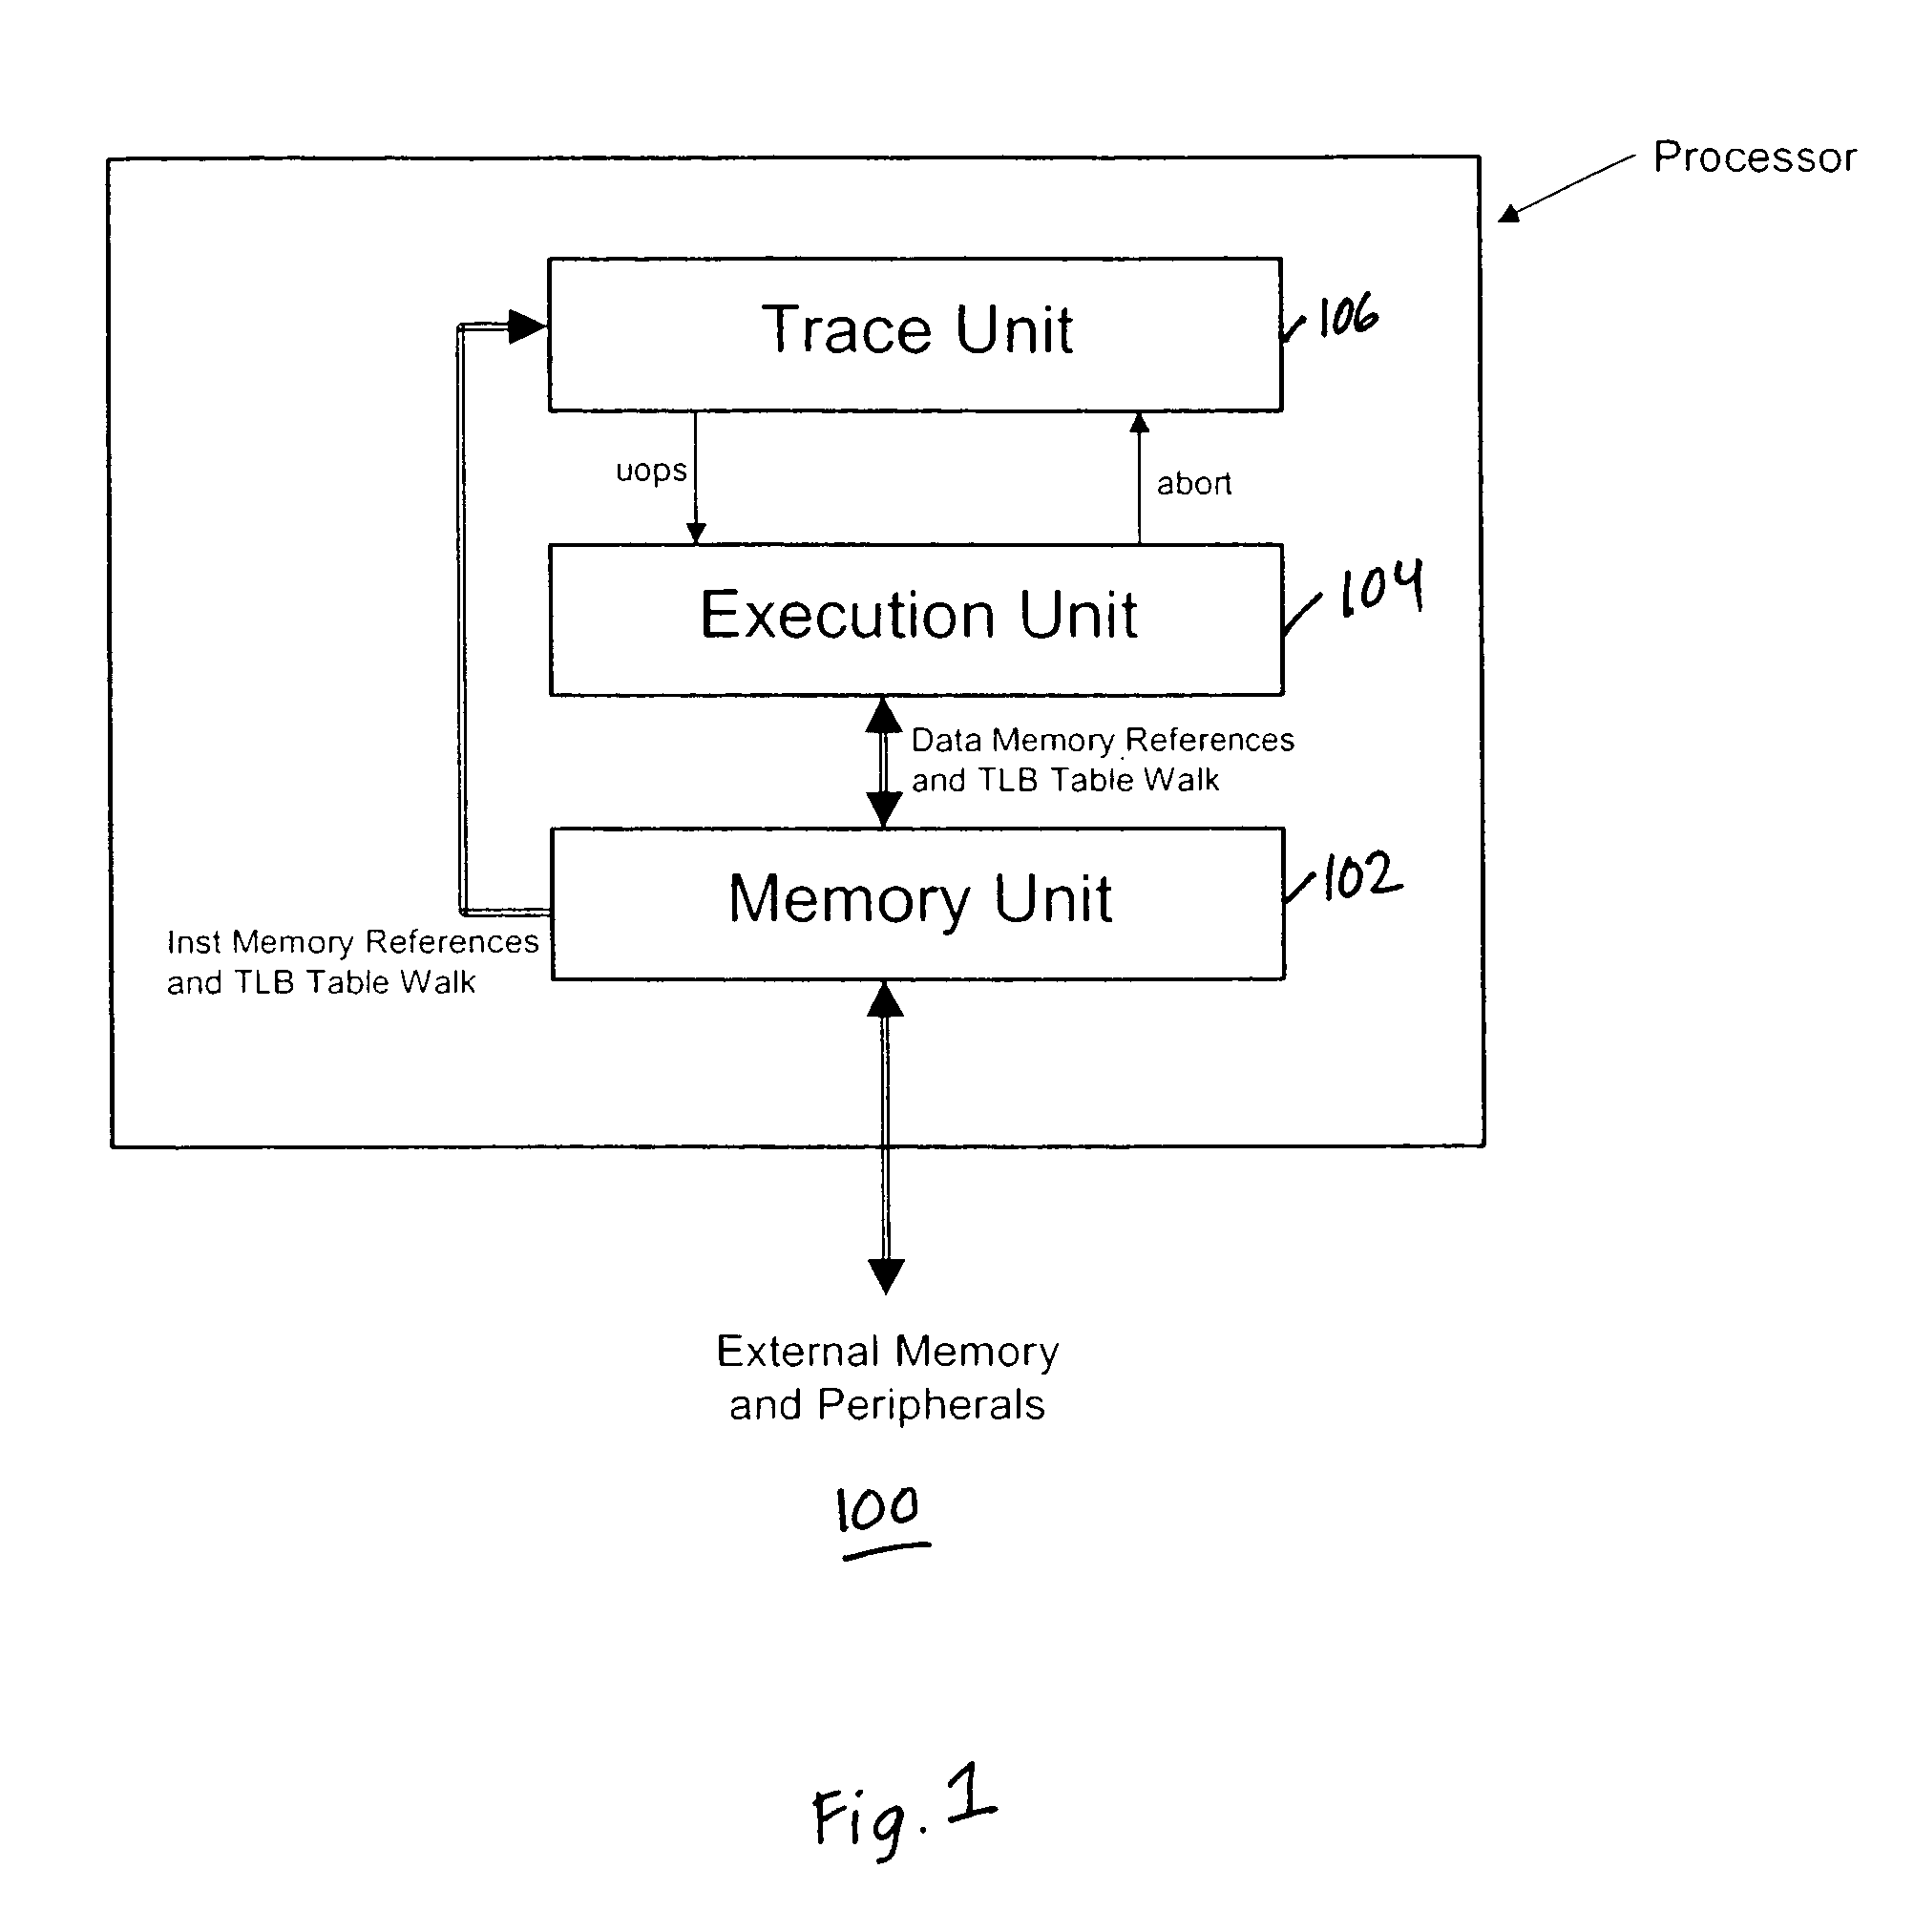 Maintaining memory coherency with a trace cache